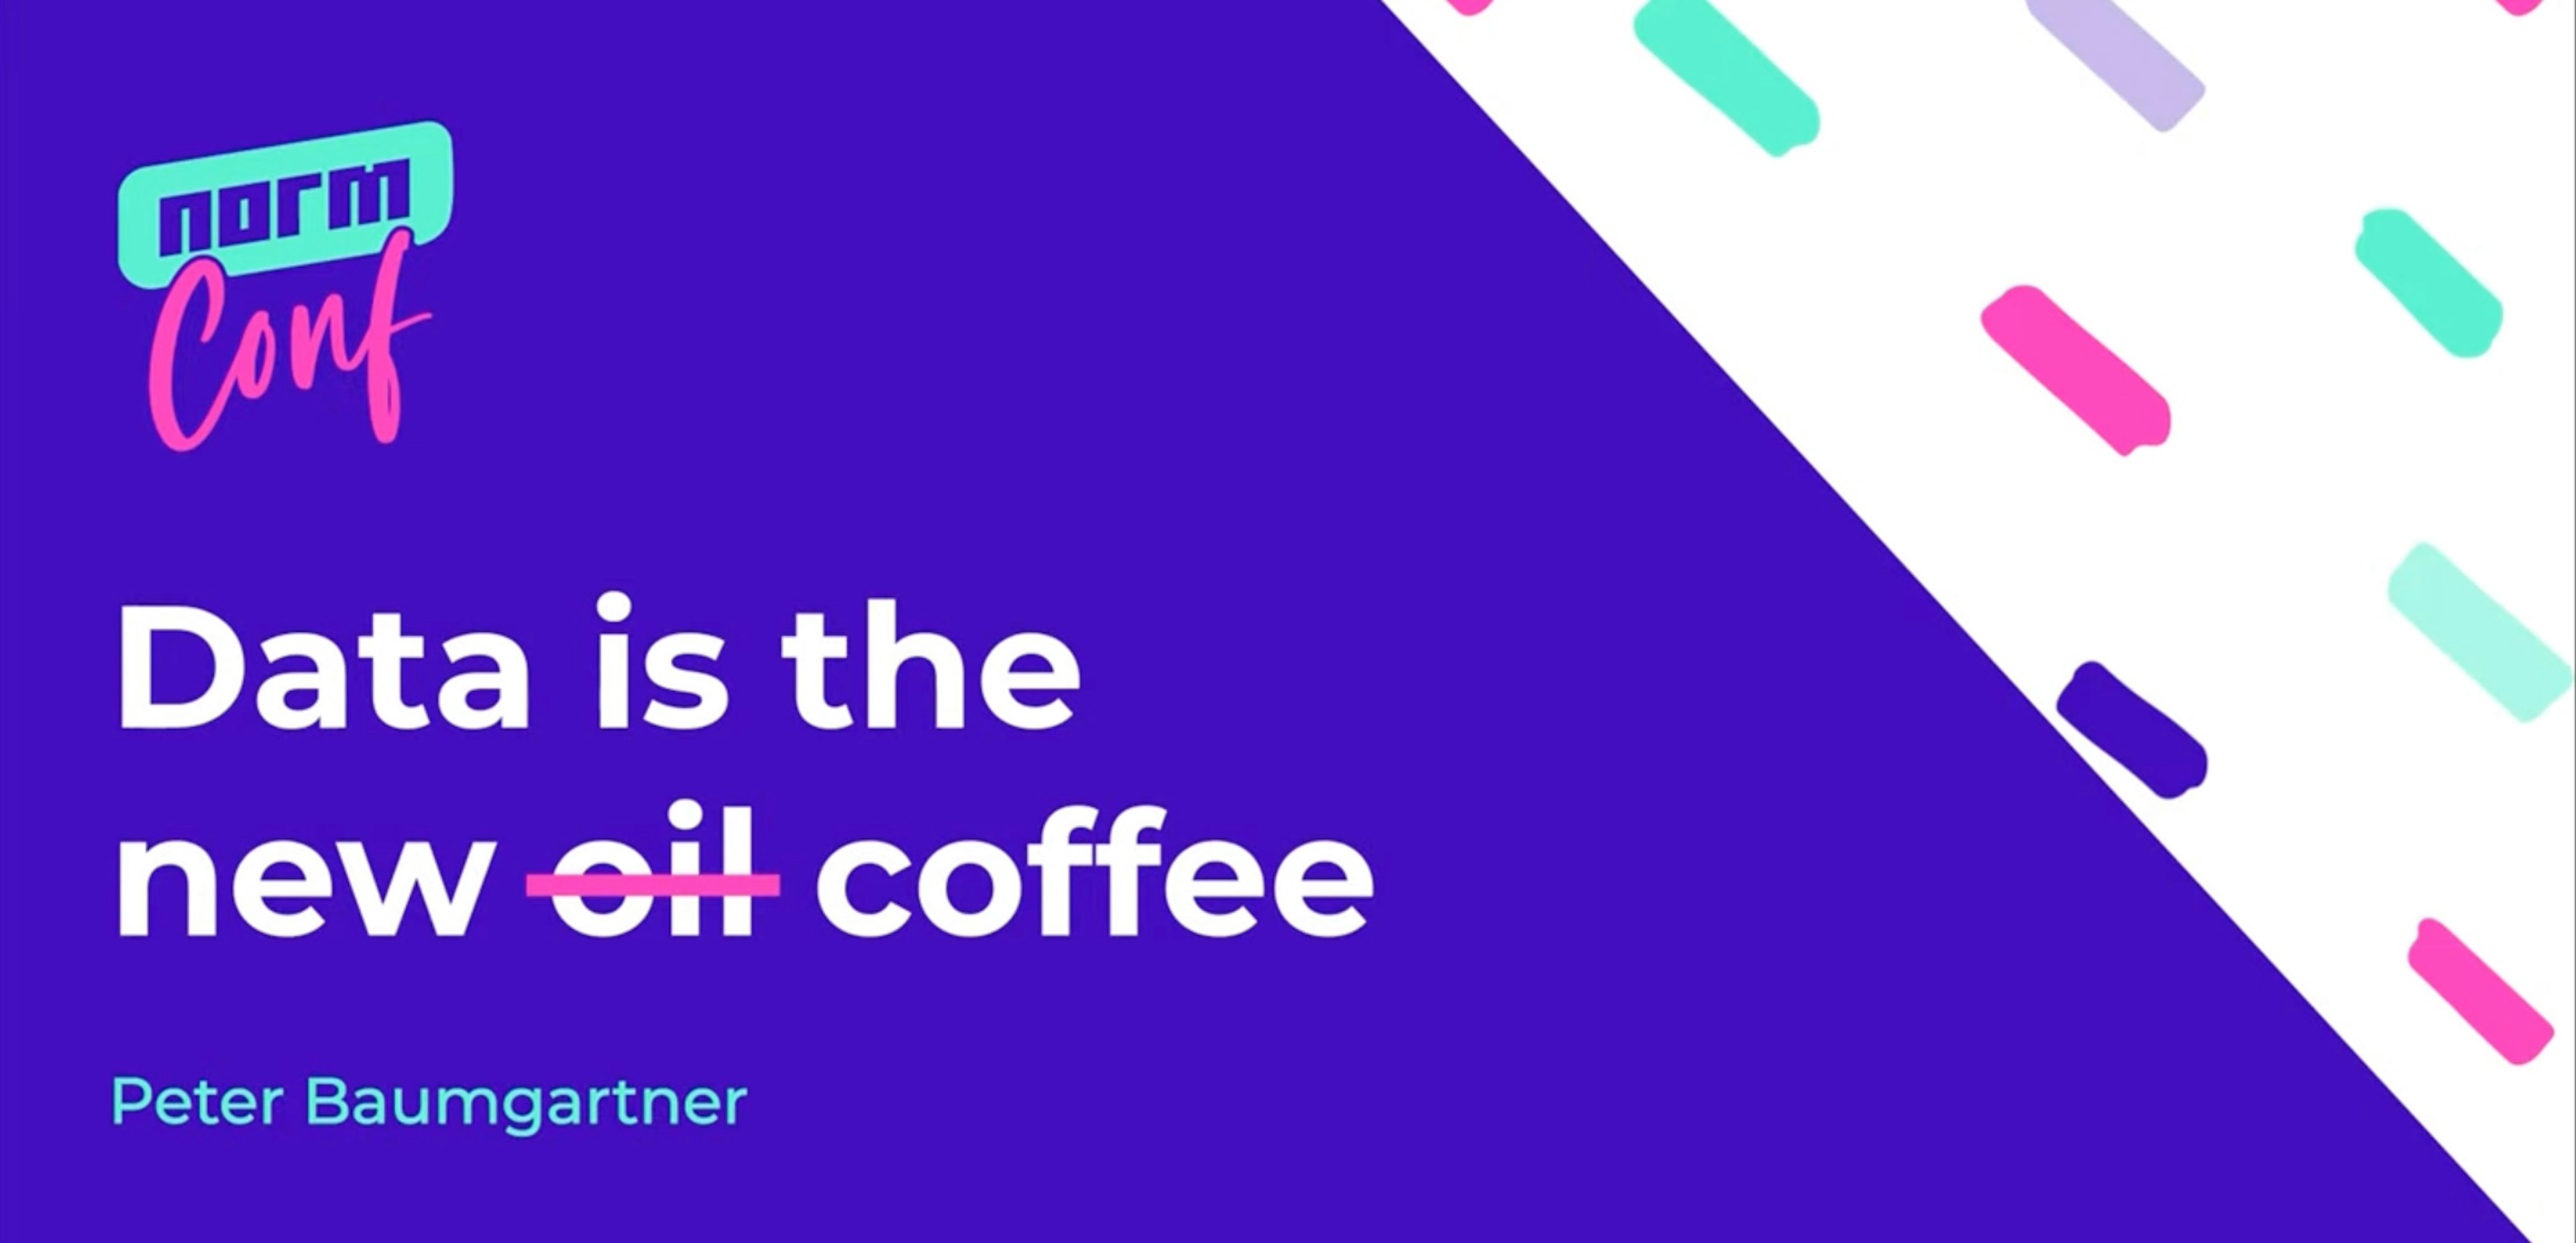 Data is the new coffee